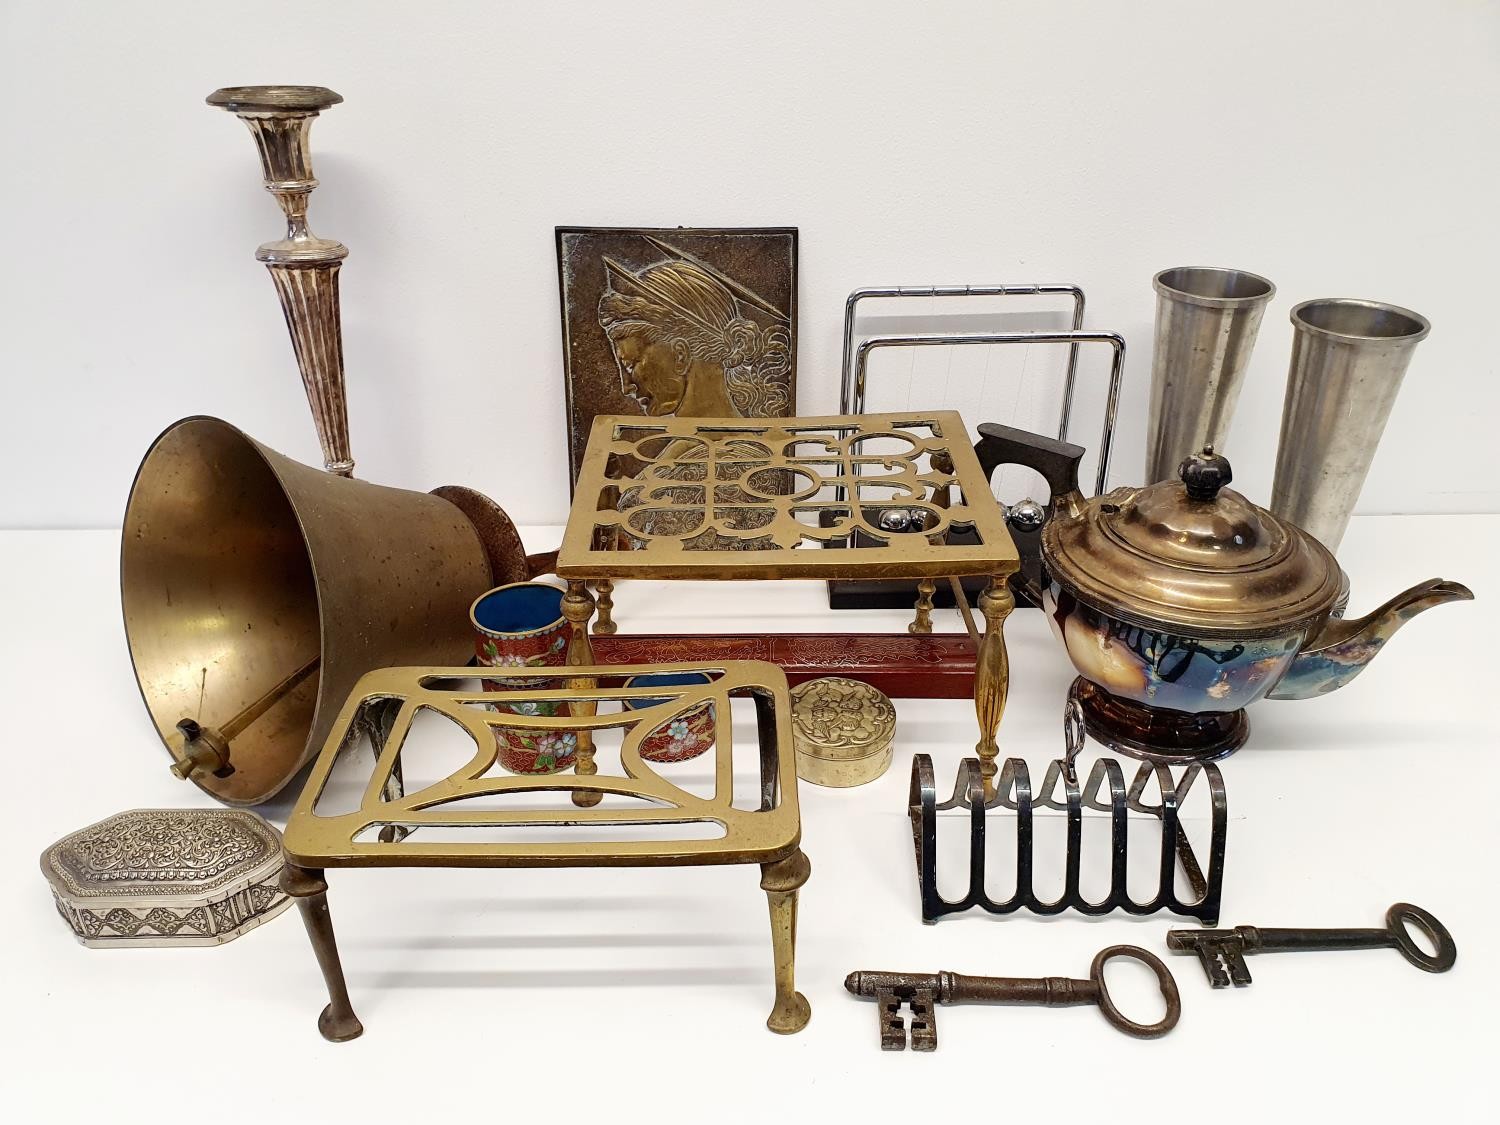 A brass bell, a trivet, a silver plated teapot and assorted metal ware (box)